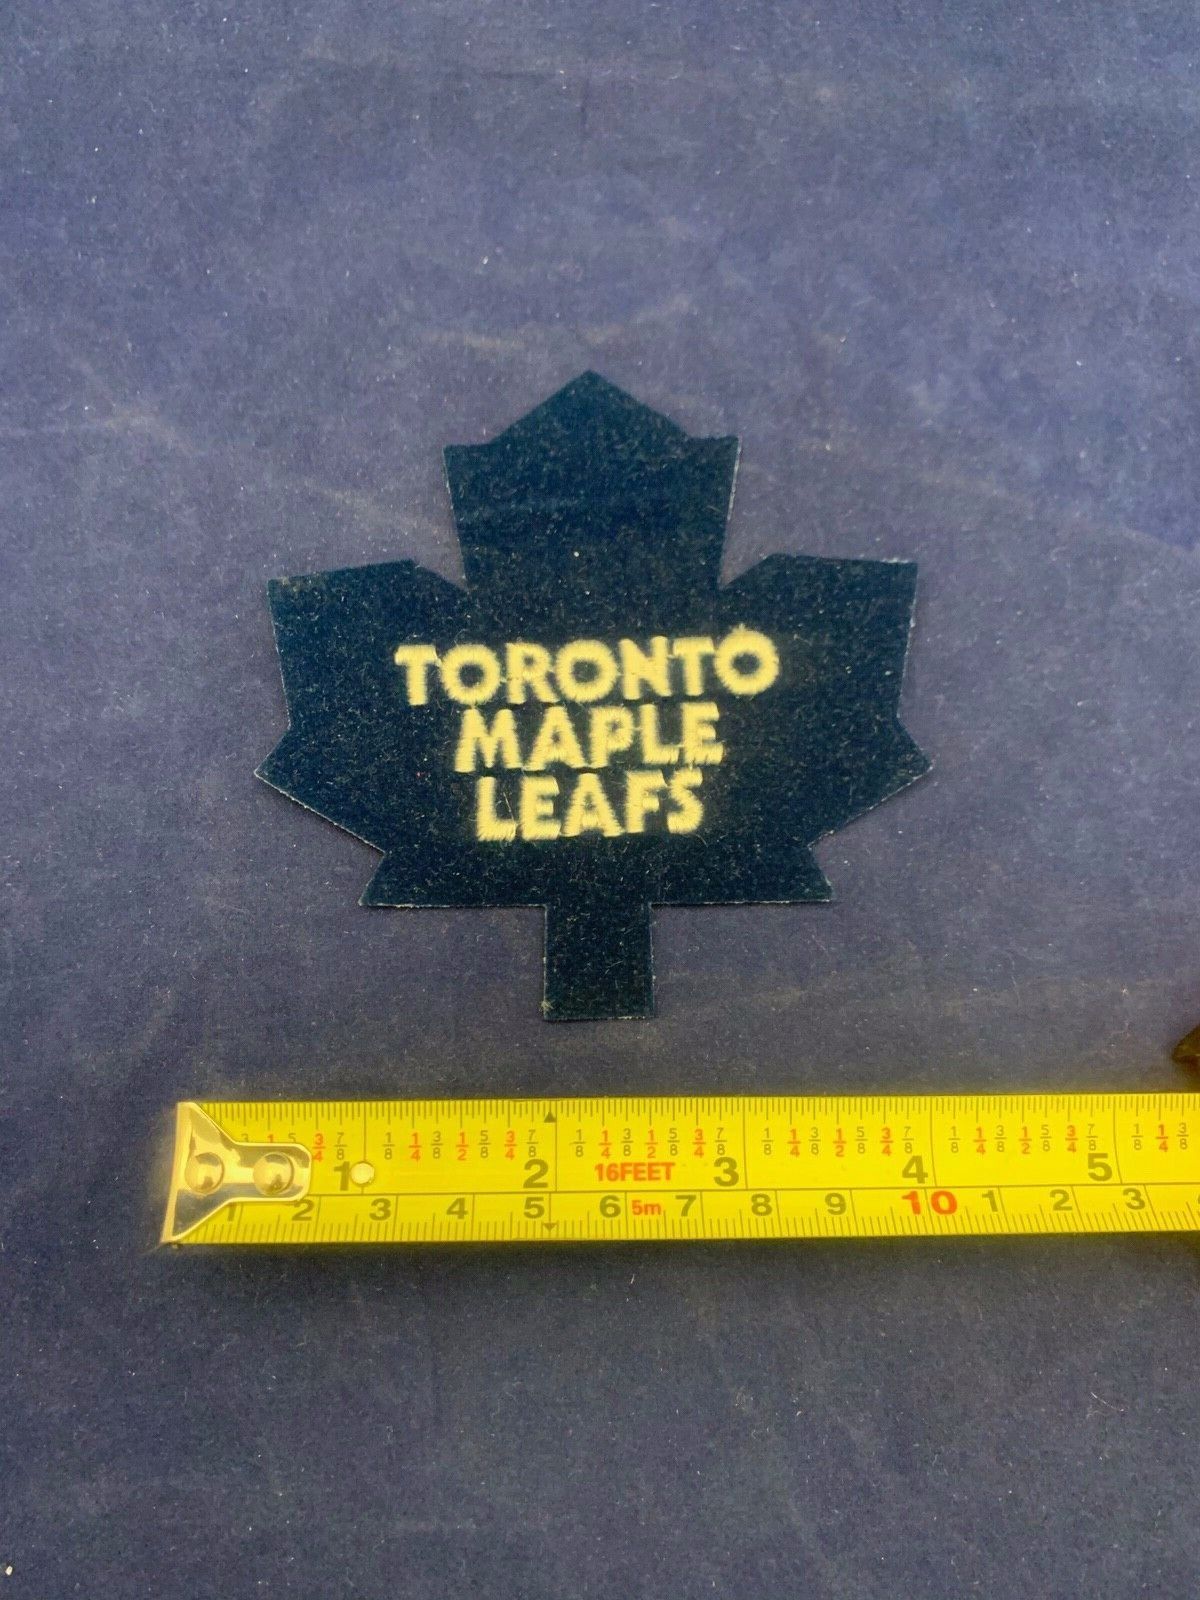 Toronto Maple Leafs NHL Hockey Patch Size 4 x 4.5 inches